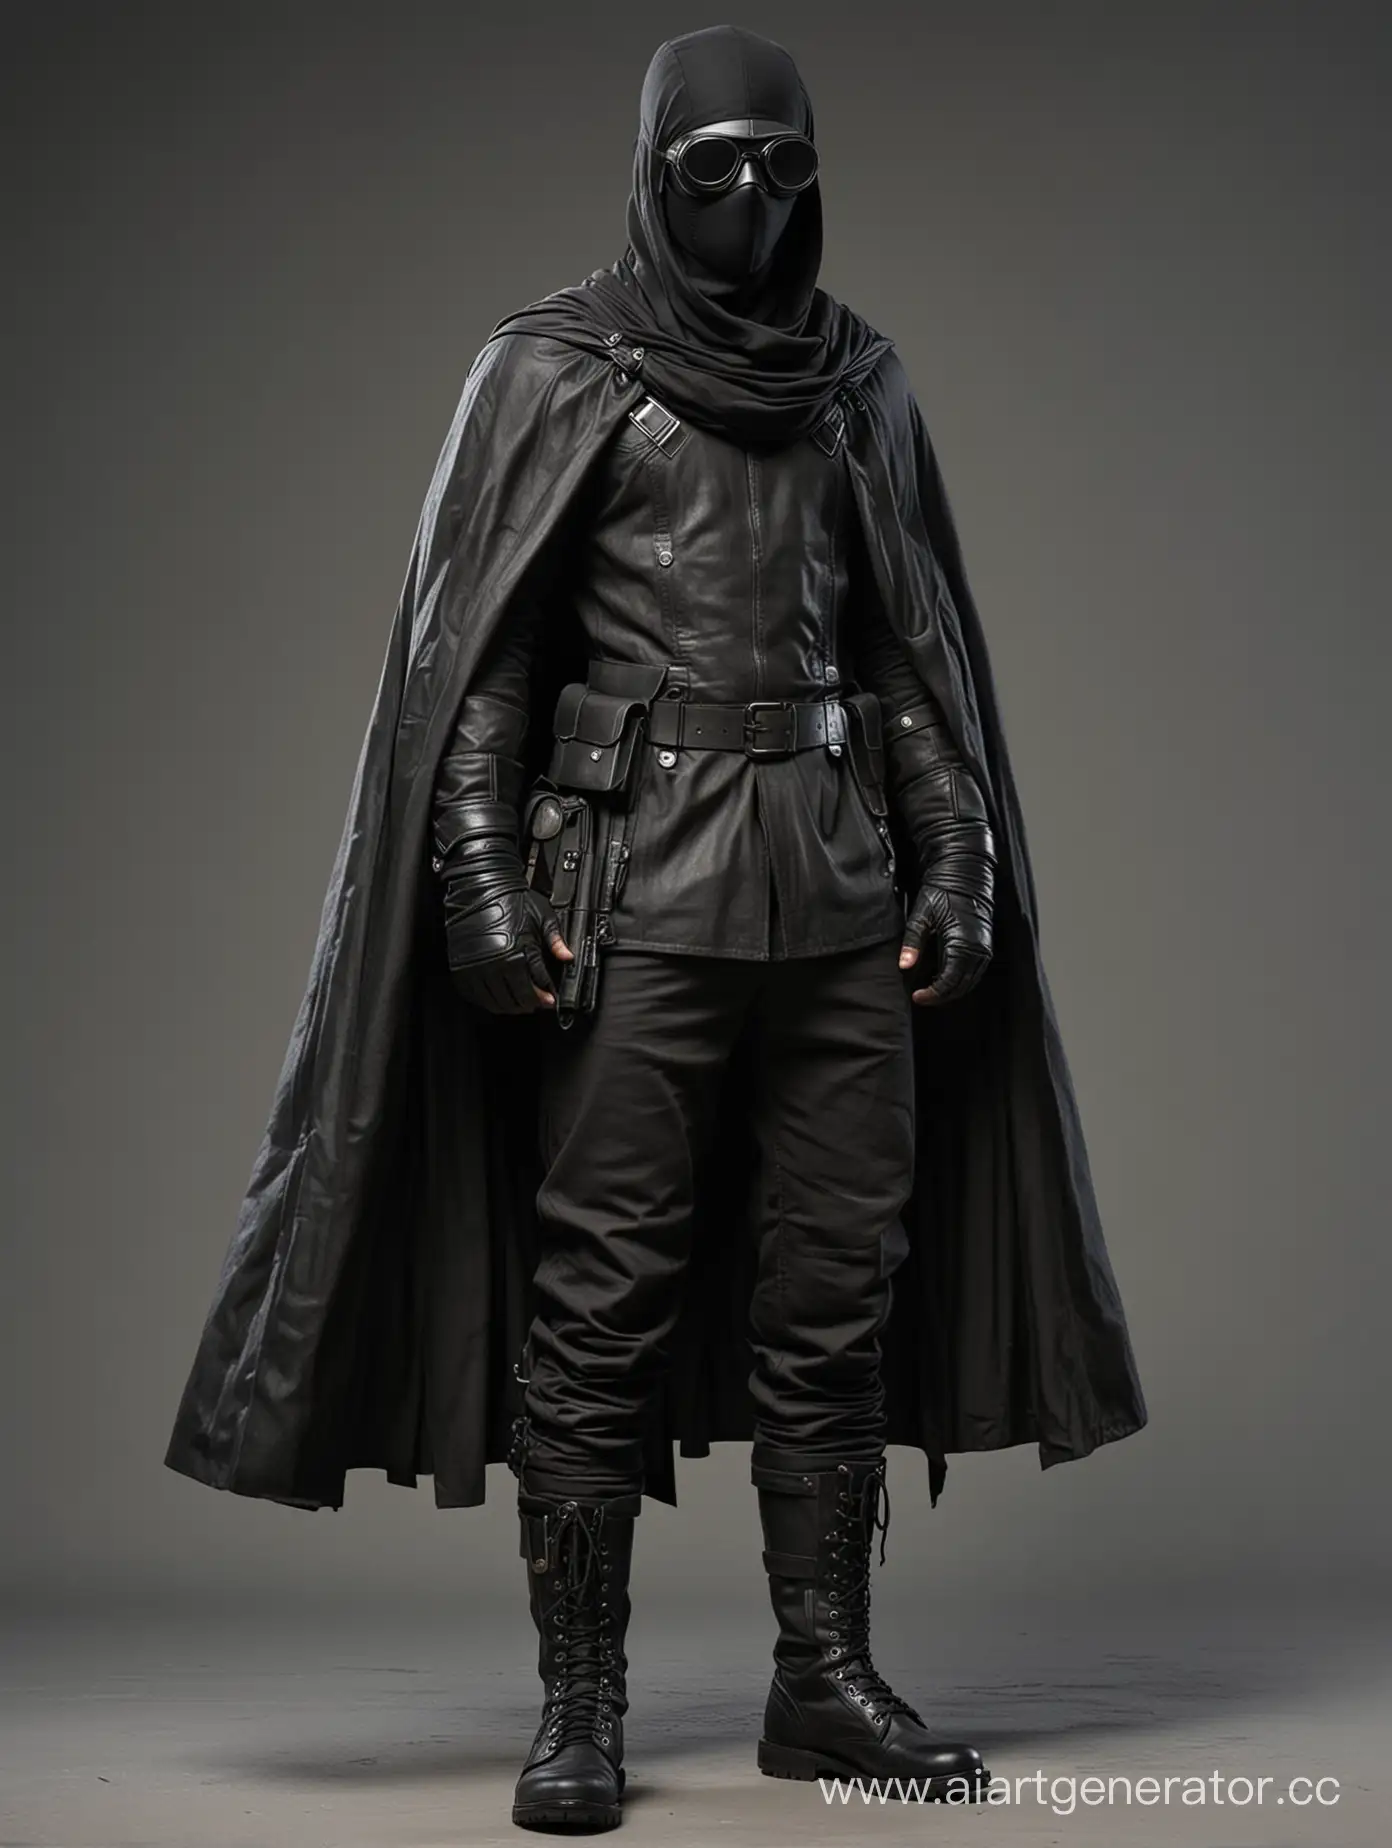 A soldier future with broad shoulders and a narrow waist, a cap on his head, a black leather cloak on top, black boots and baggy black pants, his face hidden by a mask with two black lenses, full-length art